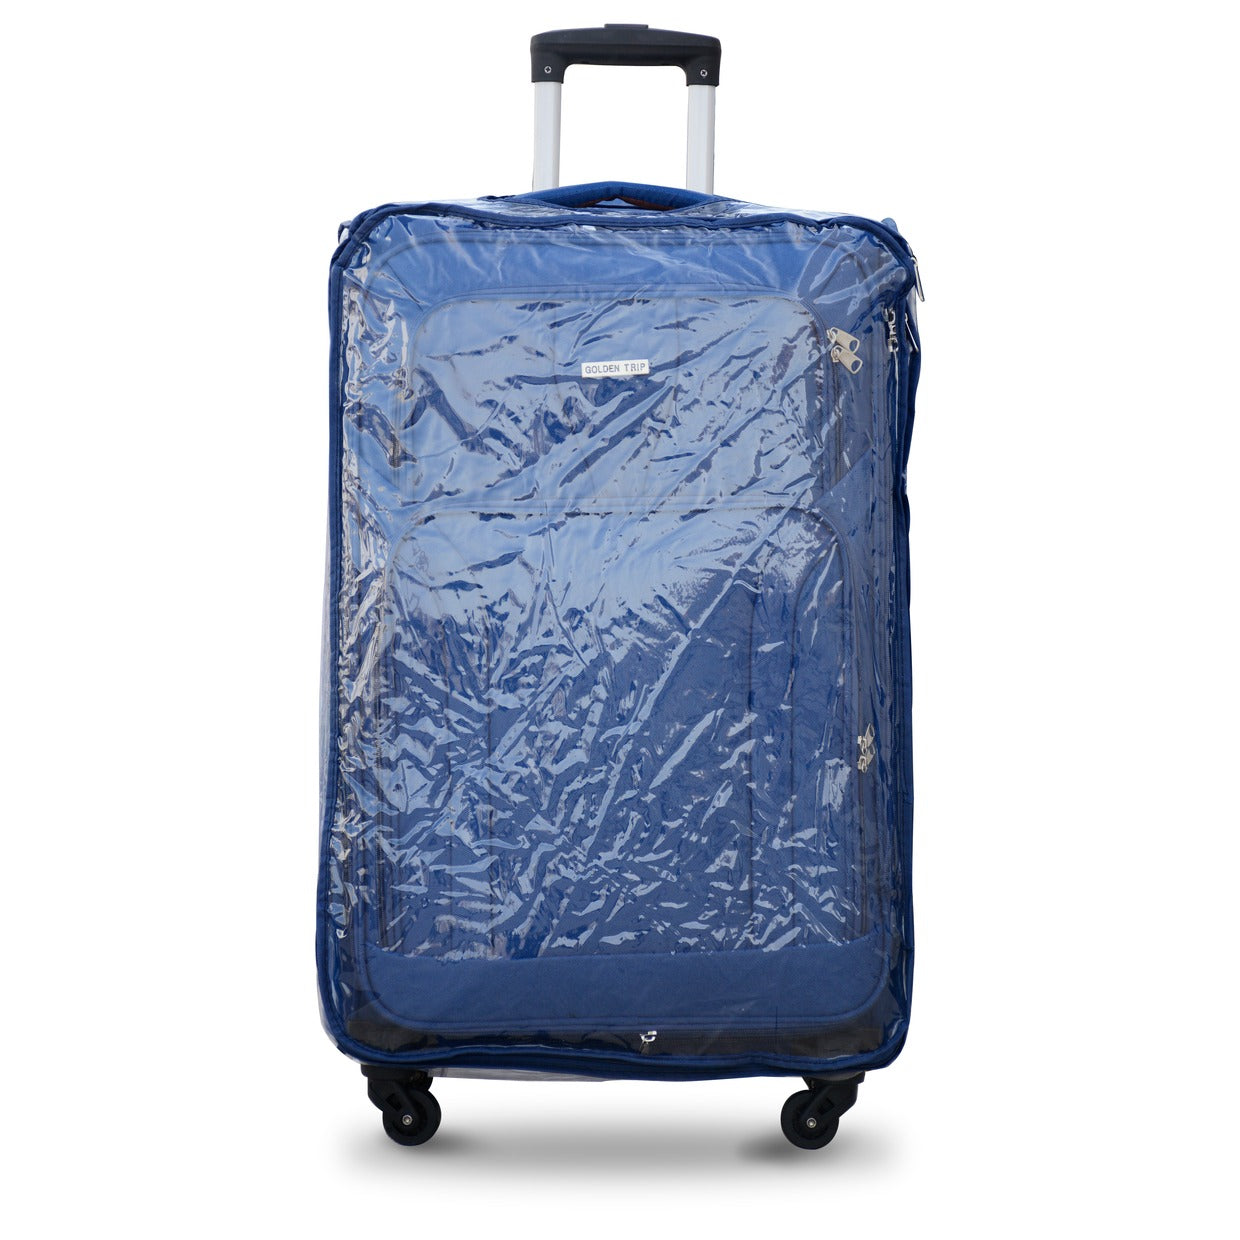 4 Wheel Premium Soft Material Luggage Bag Blue with Cover | Luggage With Cover Zaappy